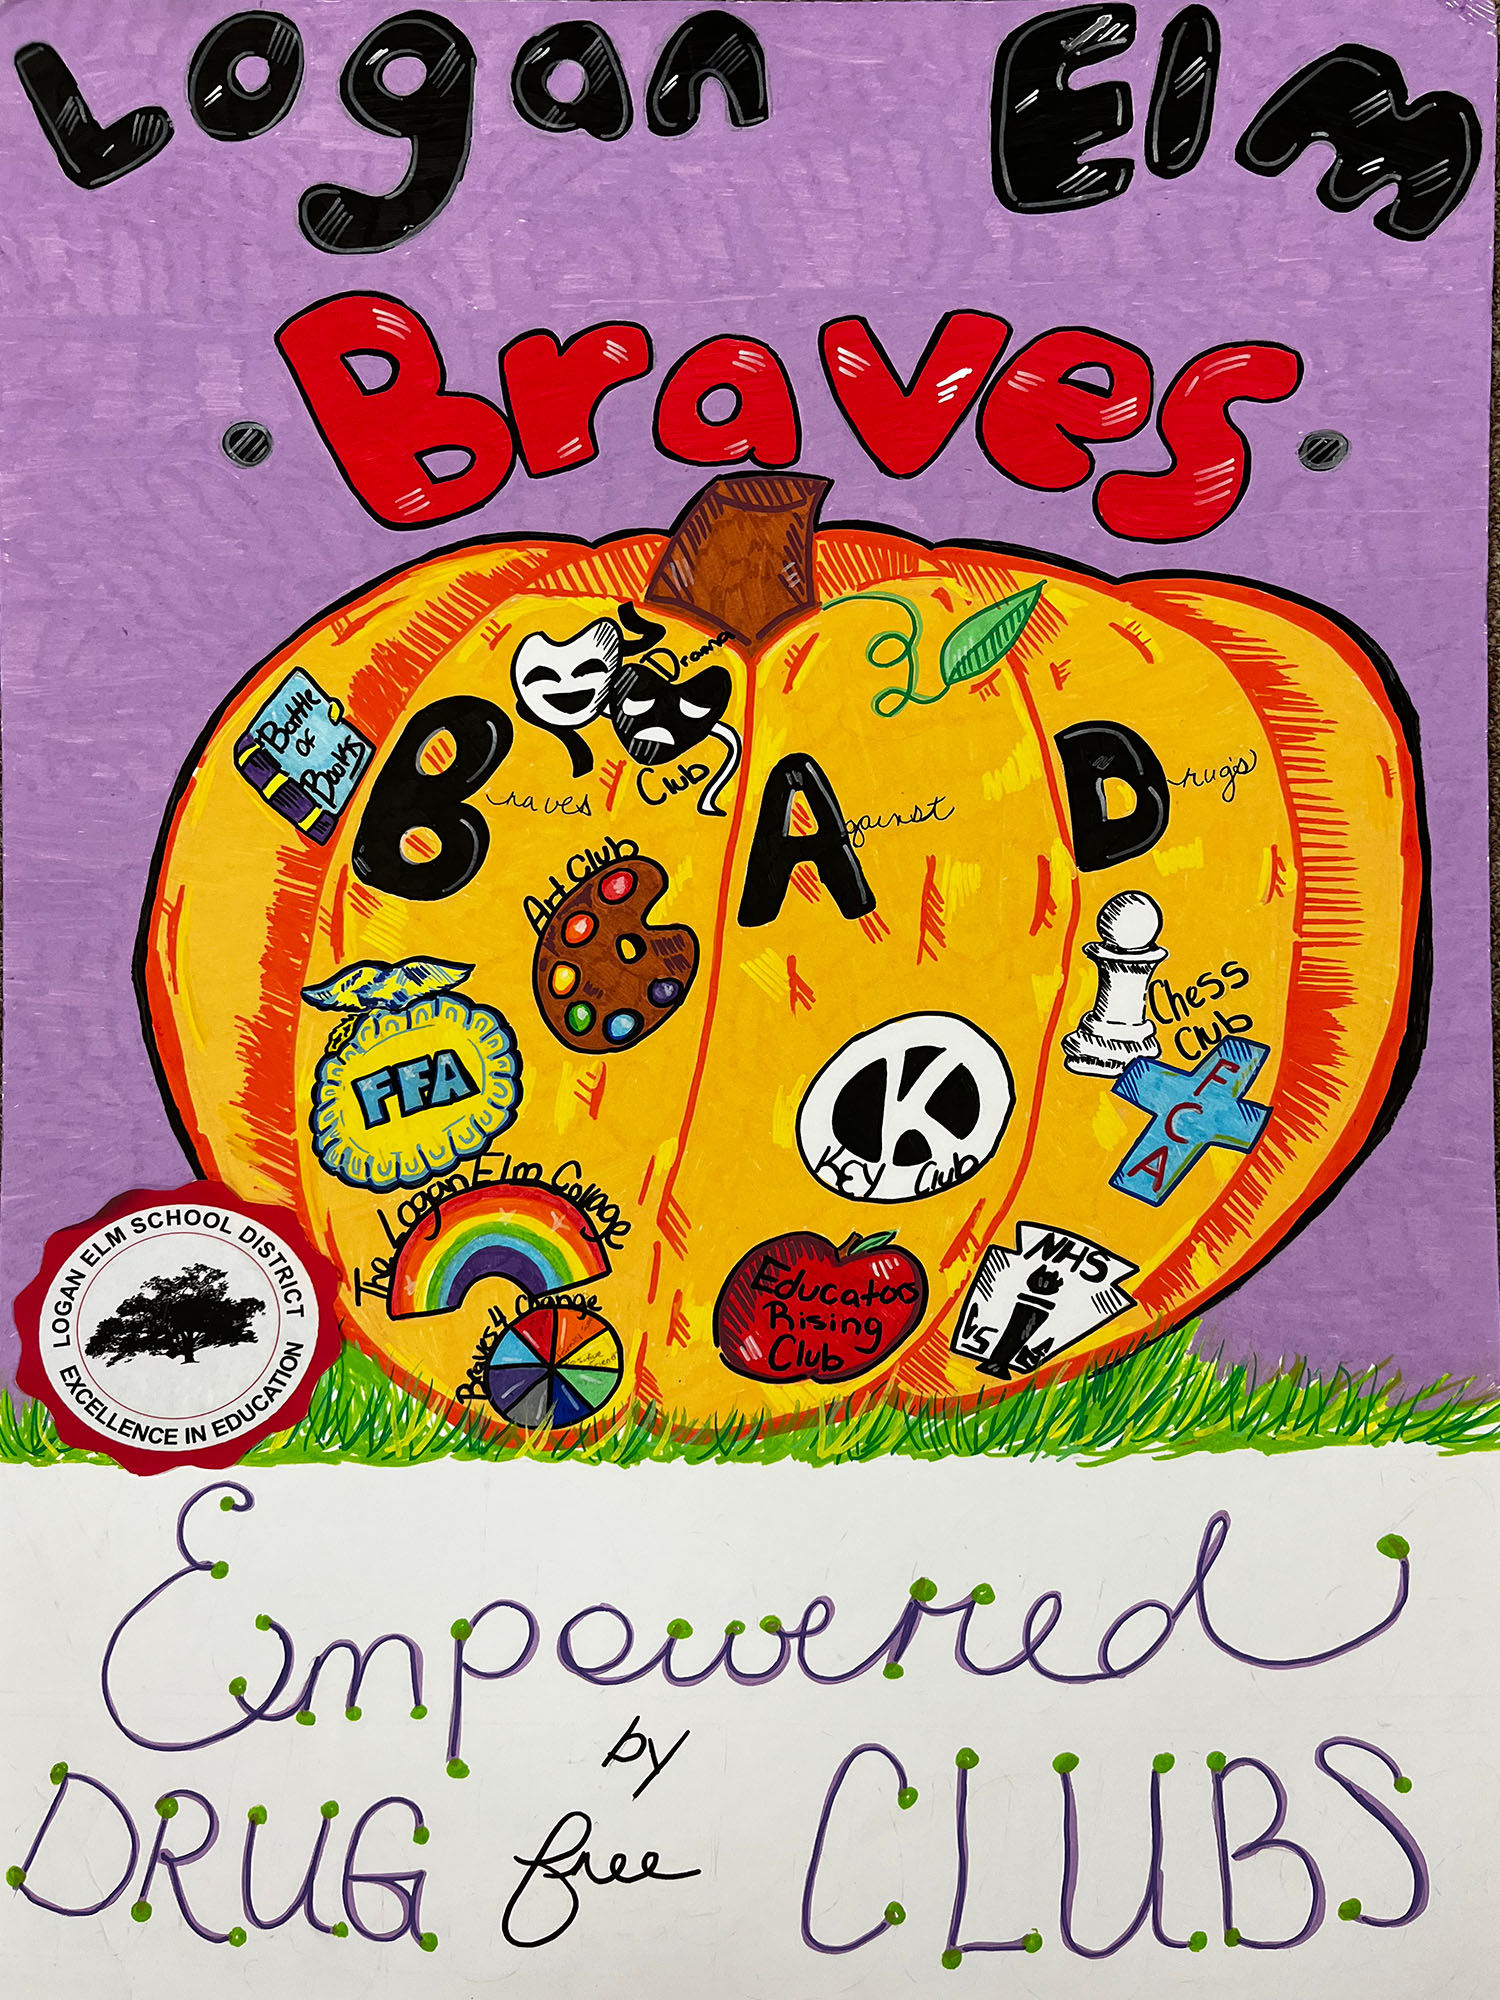 Logan Elm Braves, empowered by Drug free Clubs. Pumpkin artwork with different school clubs and the acronym 